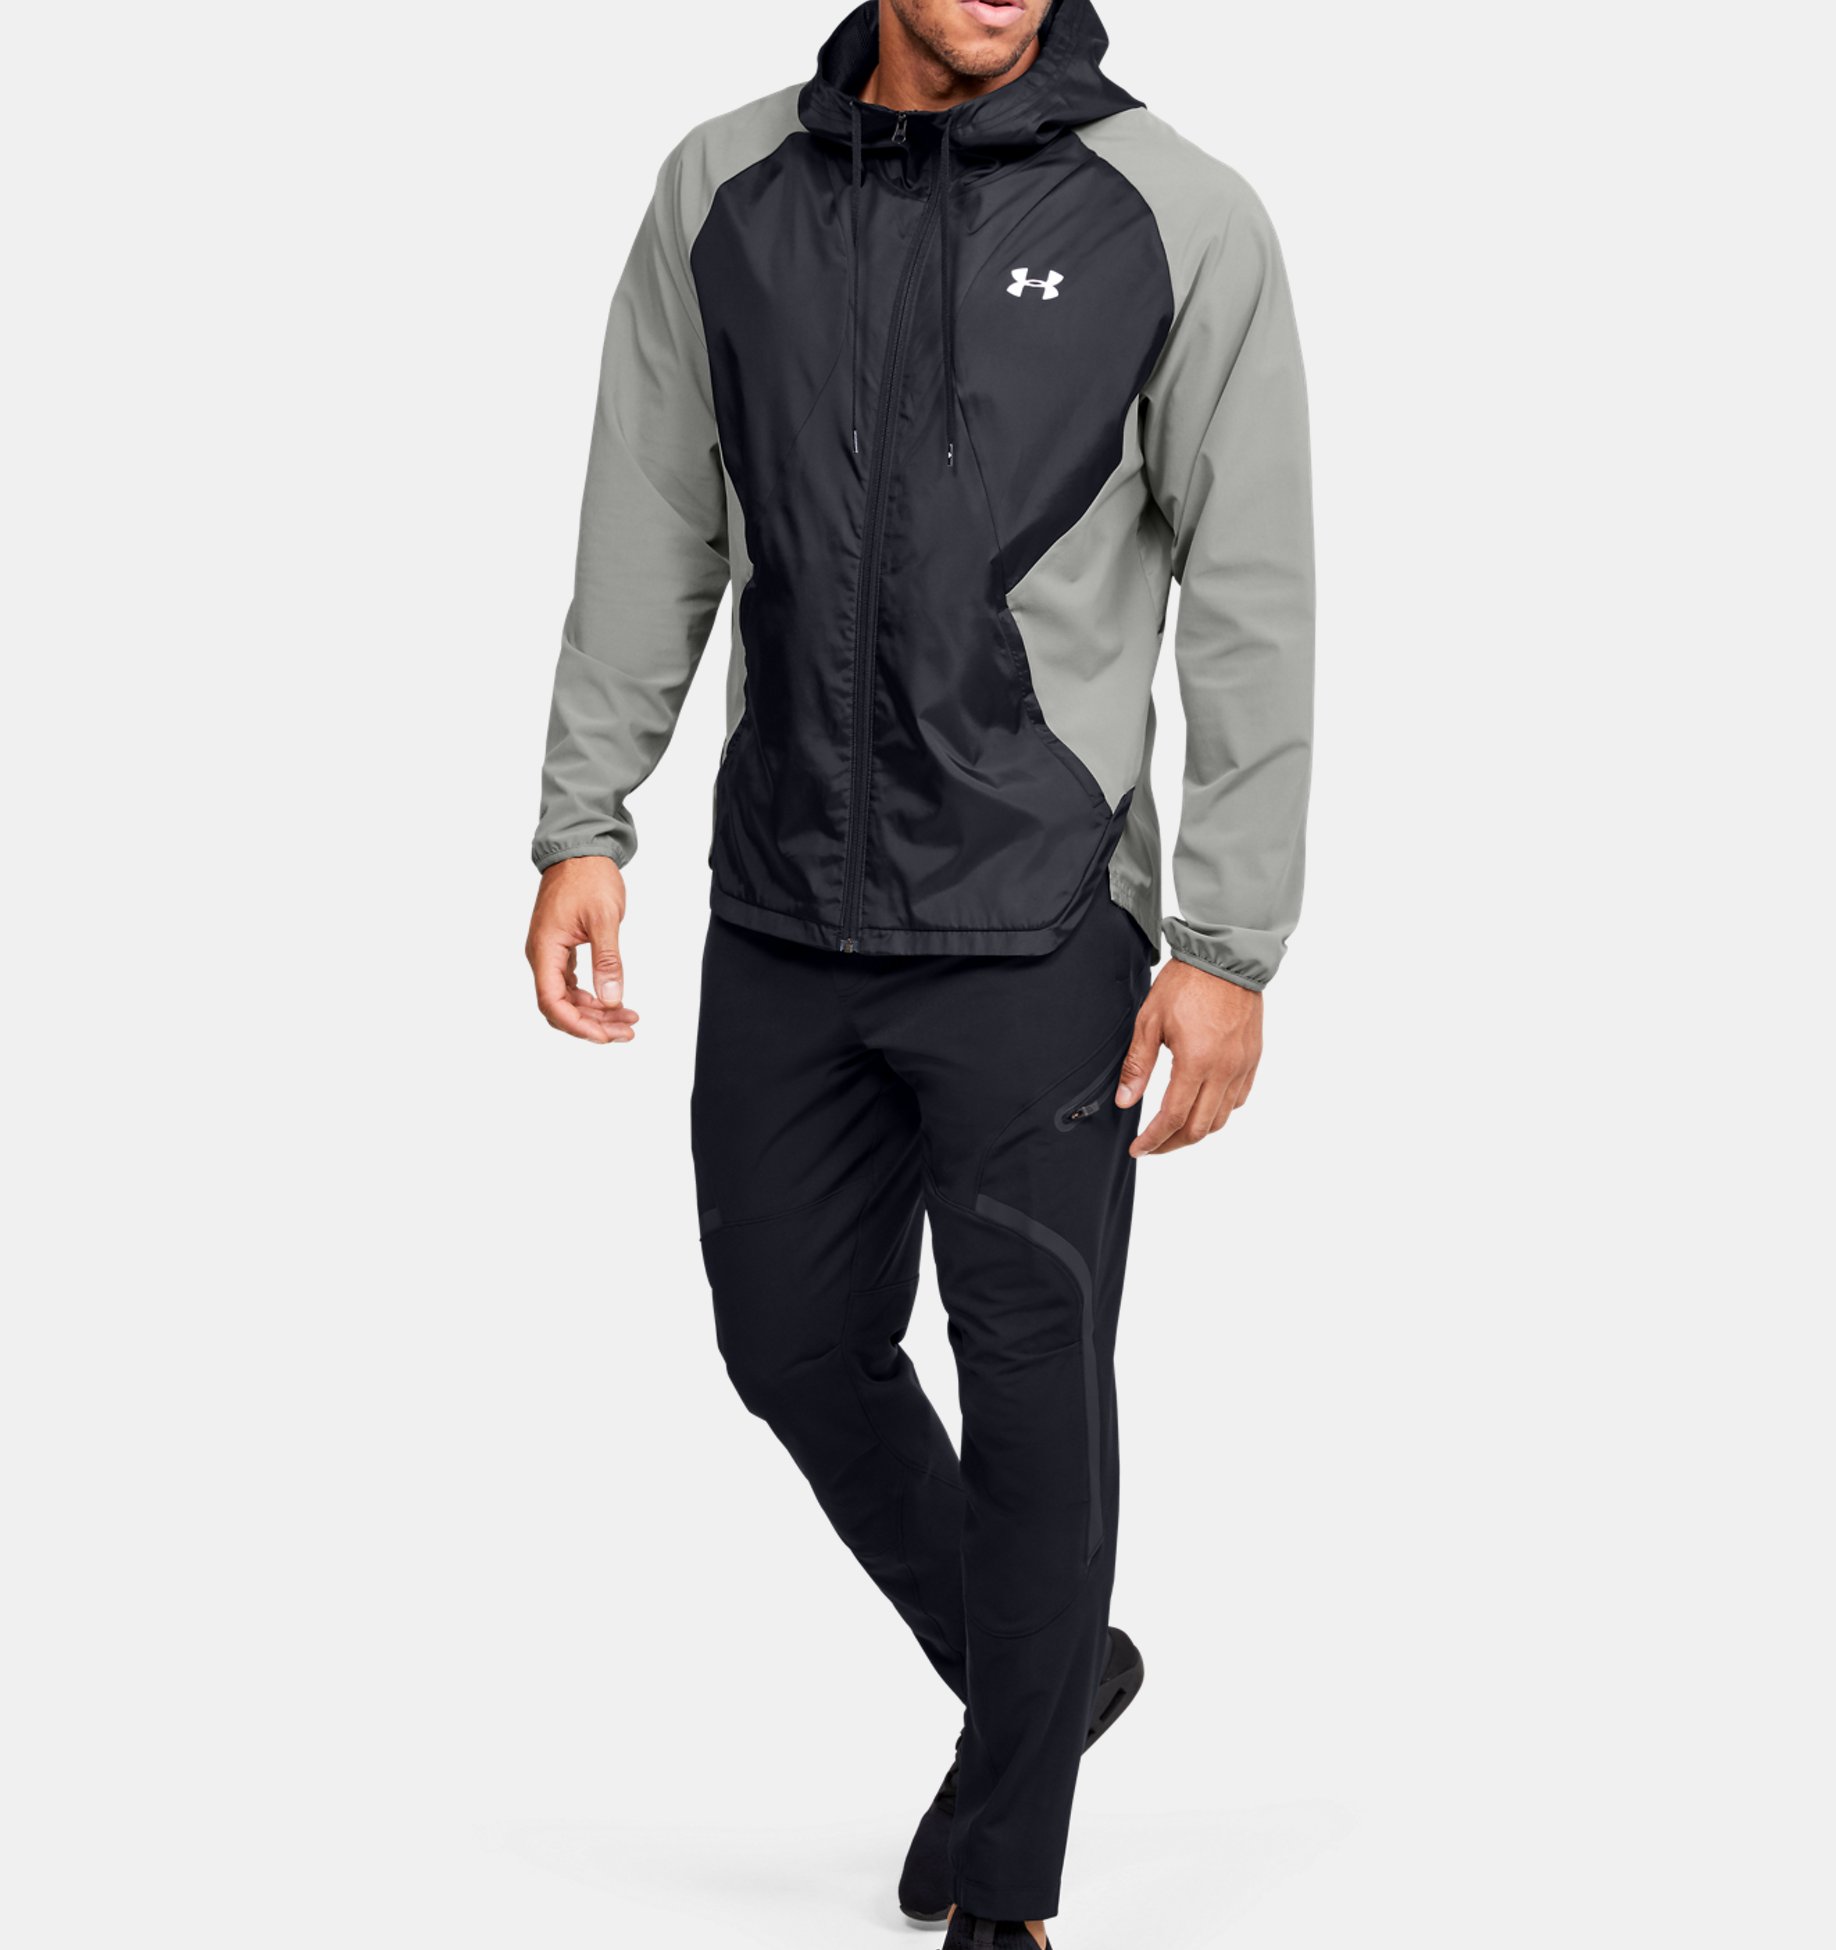 https://underarmour.scene7.com/is/image/Underarmour/V5-1352026-001_FSF?rp=standard-0pad|pdpZoomDesktop&scl=0.72&fmt=jpg&qlt=85&resMode=sharp2&cache=on,on&bgc=f0f0f0&wid=1836&hei=1950&size=1500,1500